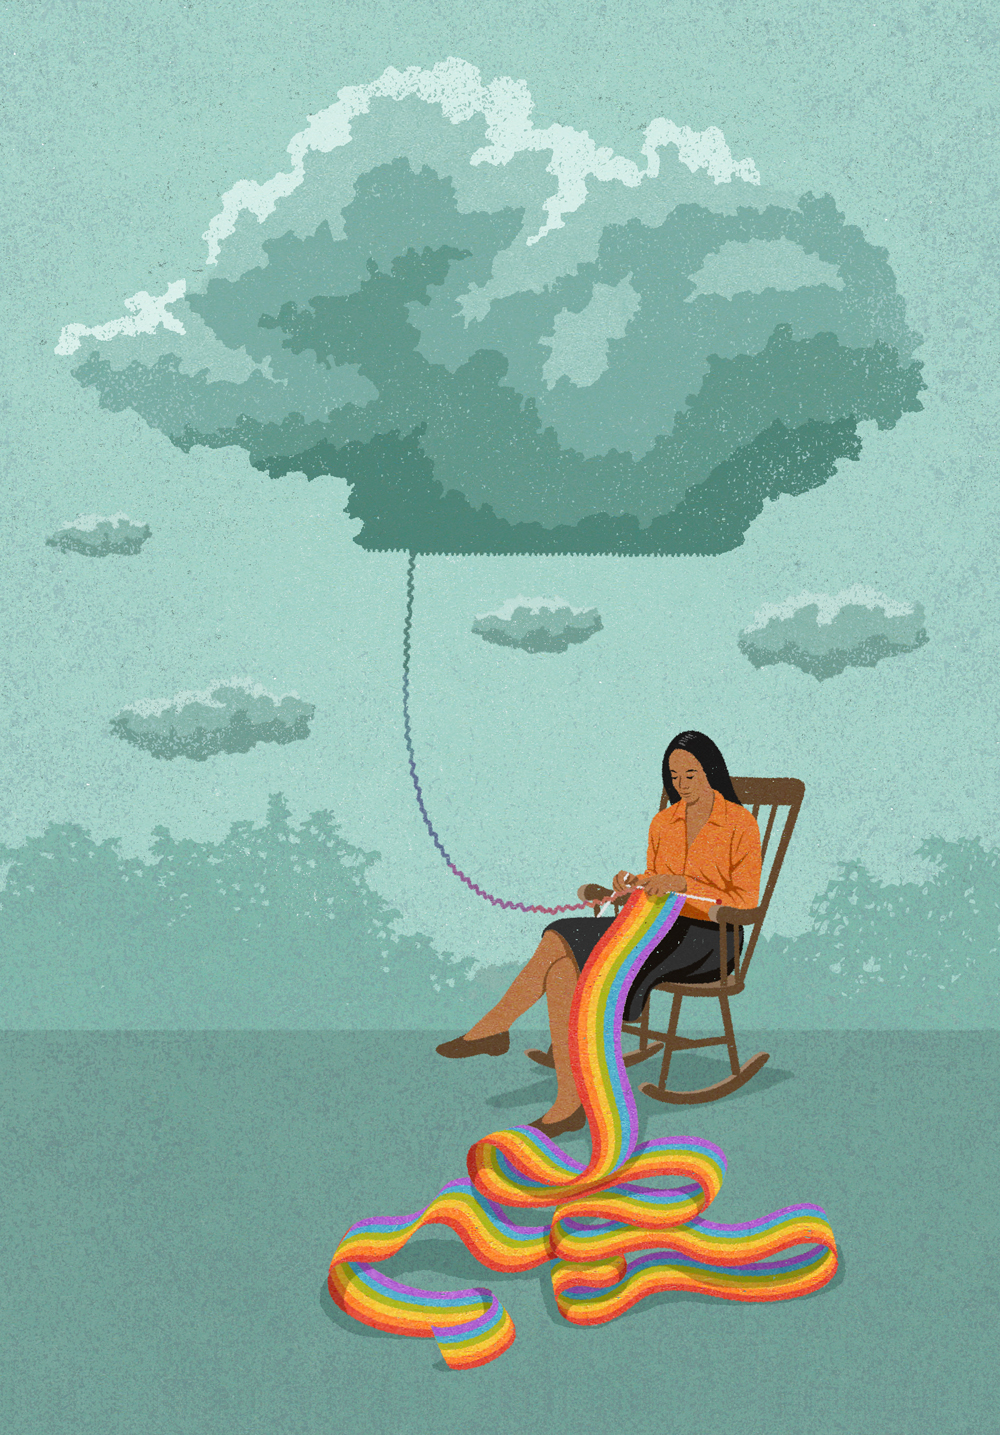 conceptual illustration about hope and optimism by John Holcroft